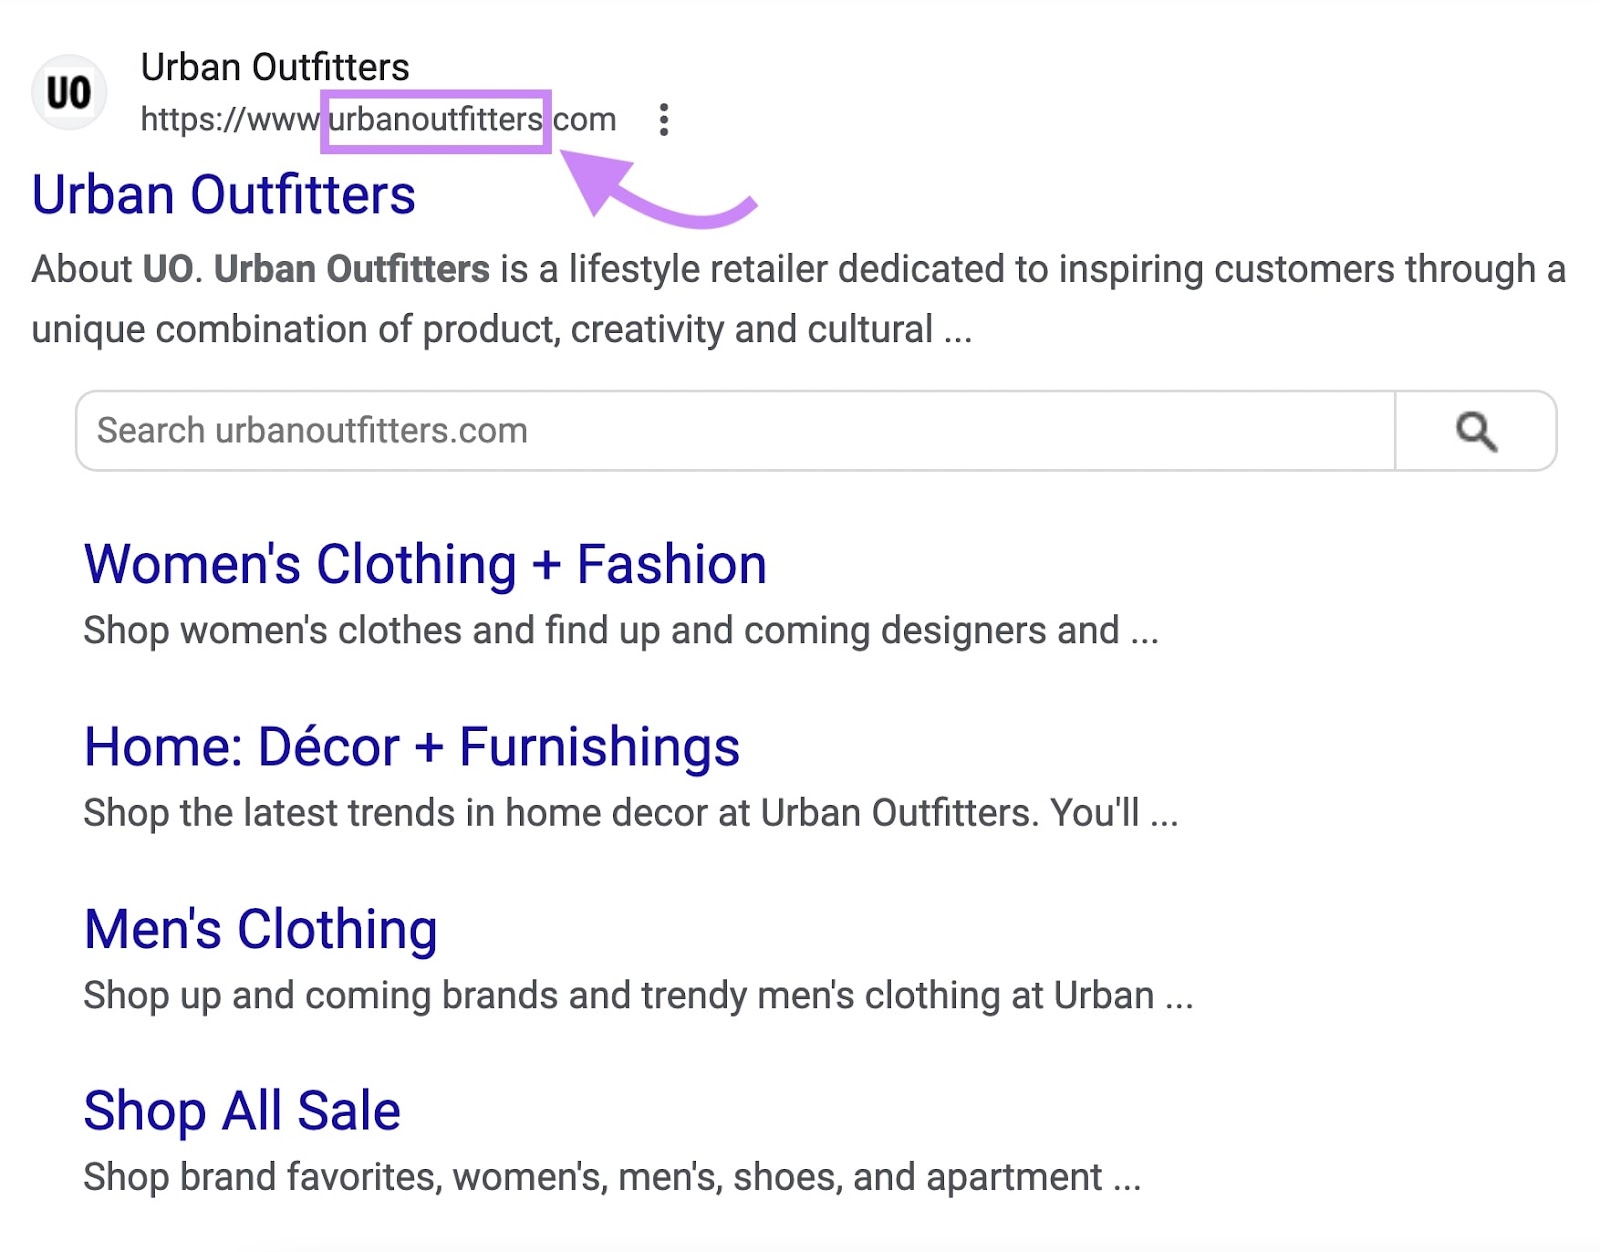 "urbanoutfitters" domain highlighted in the "https://www.urbanoutfitters.com" URL on SERP